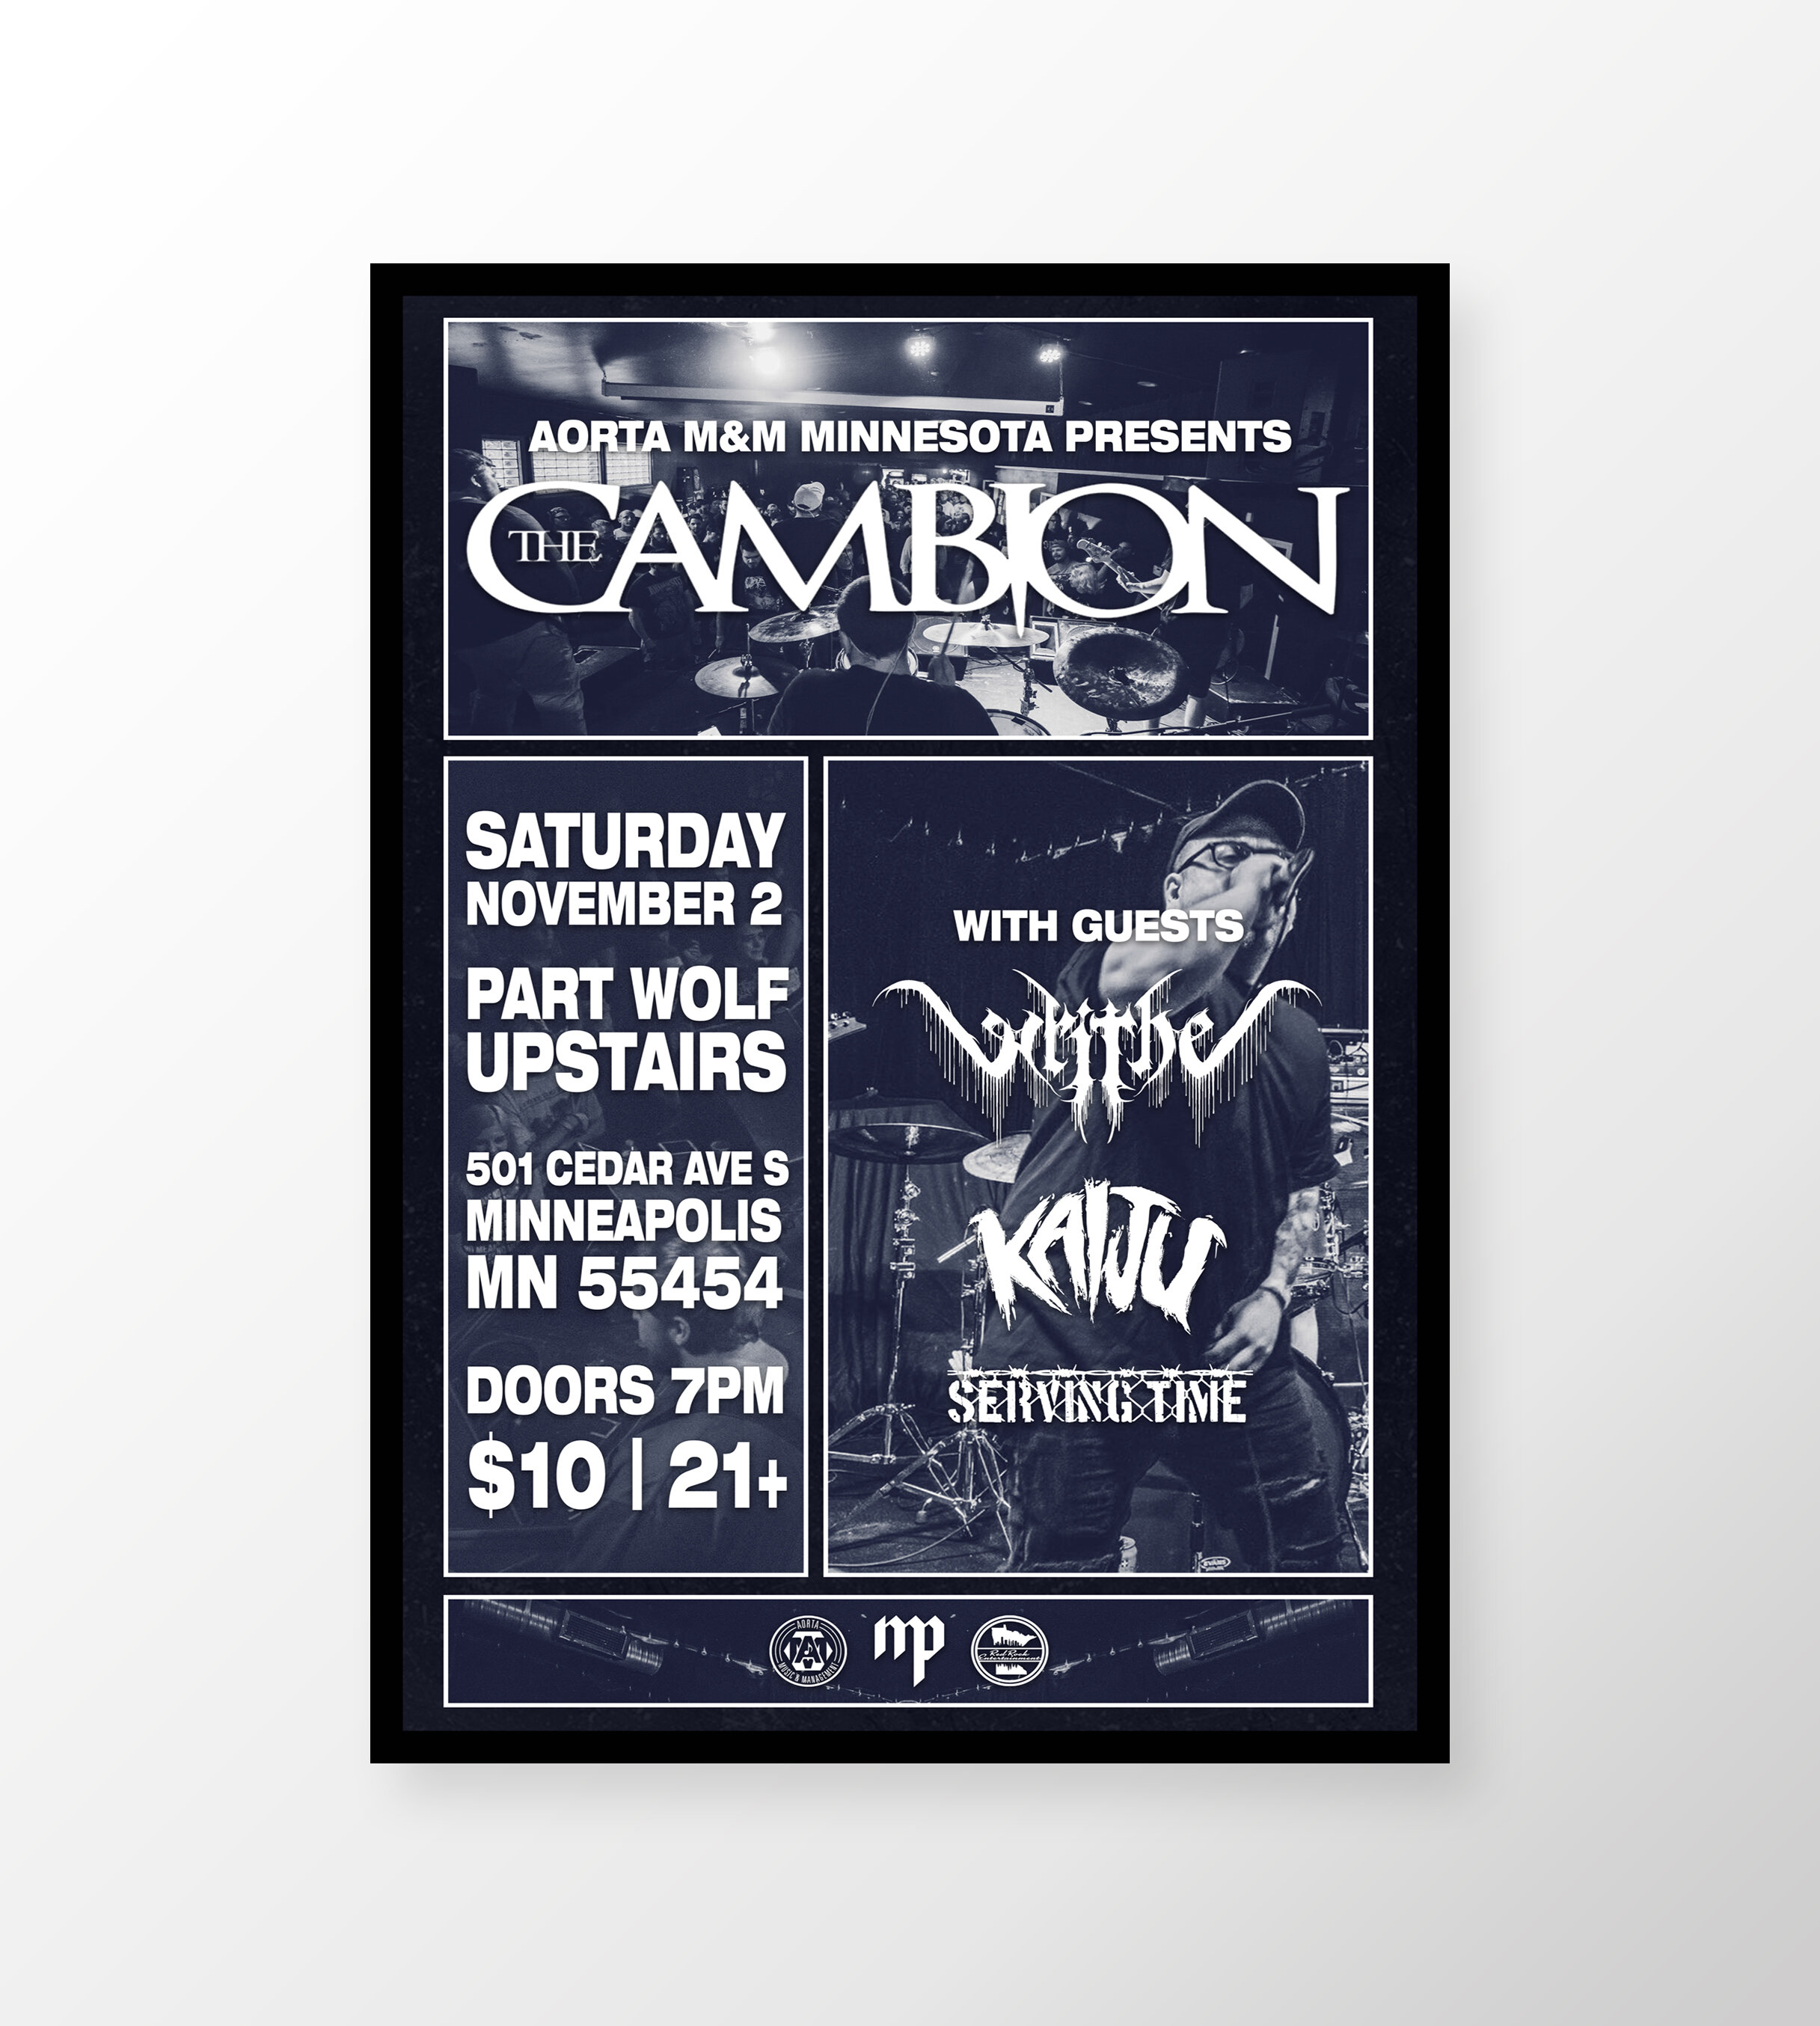 Aorta Cambion Part Wolf Show Flyer Mockup.jpg